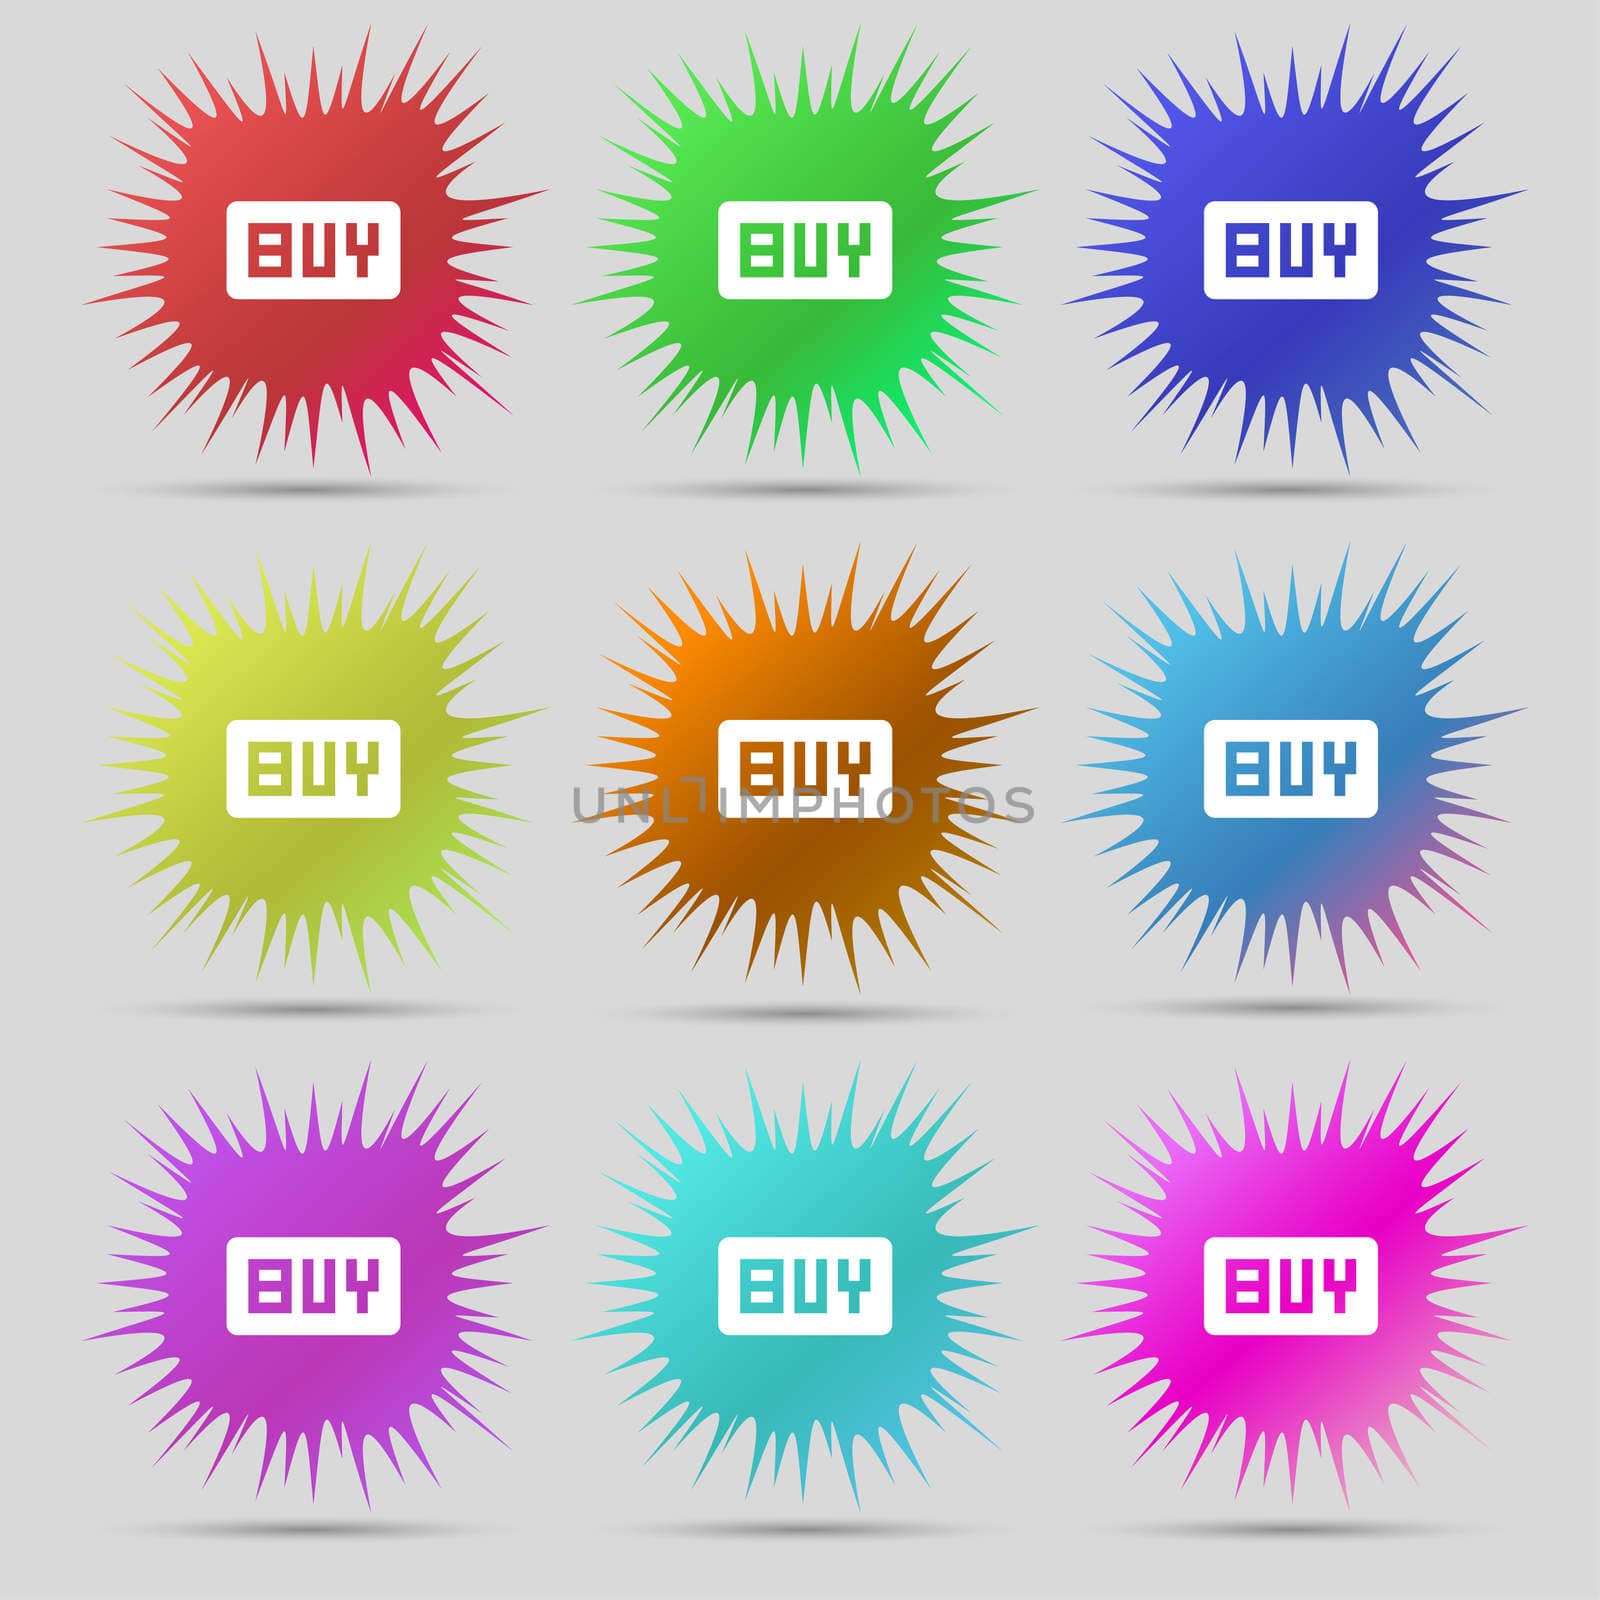 Buy, Online buying dollar usd icon sign. A set of nine original needle buttons.  by serhii_lohvyniuk